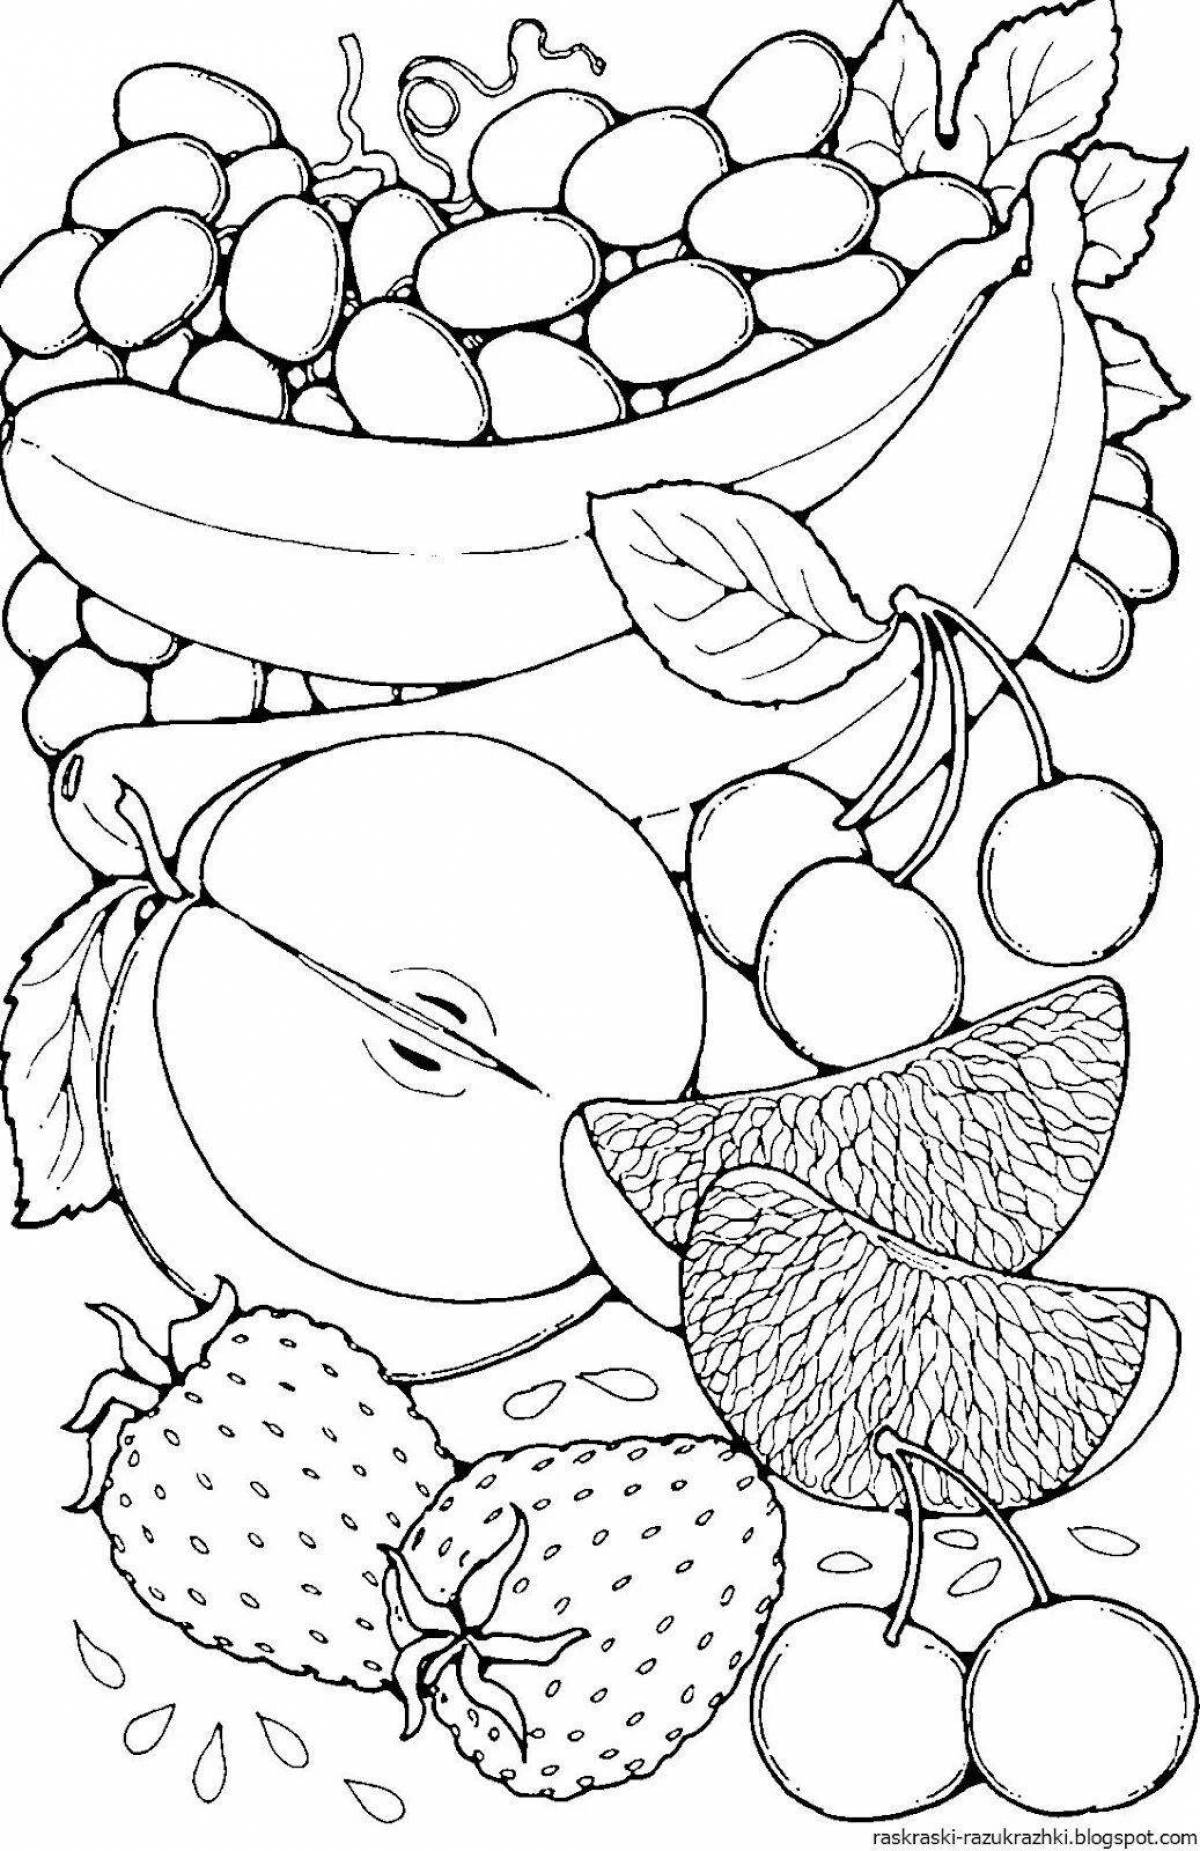 Incredible berries and fruits coloring pages for kids